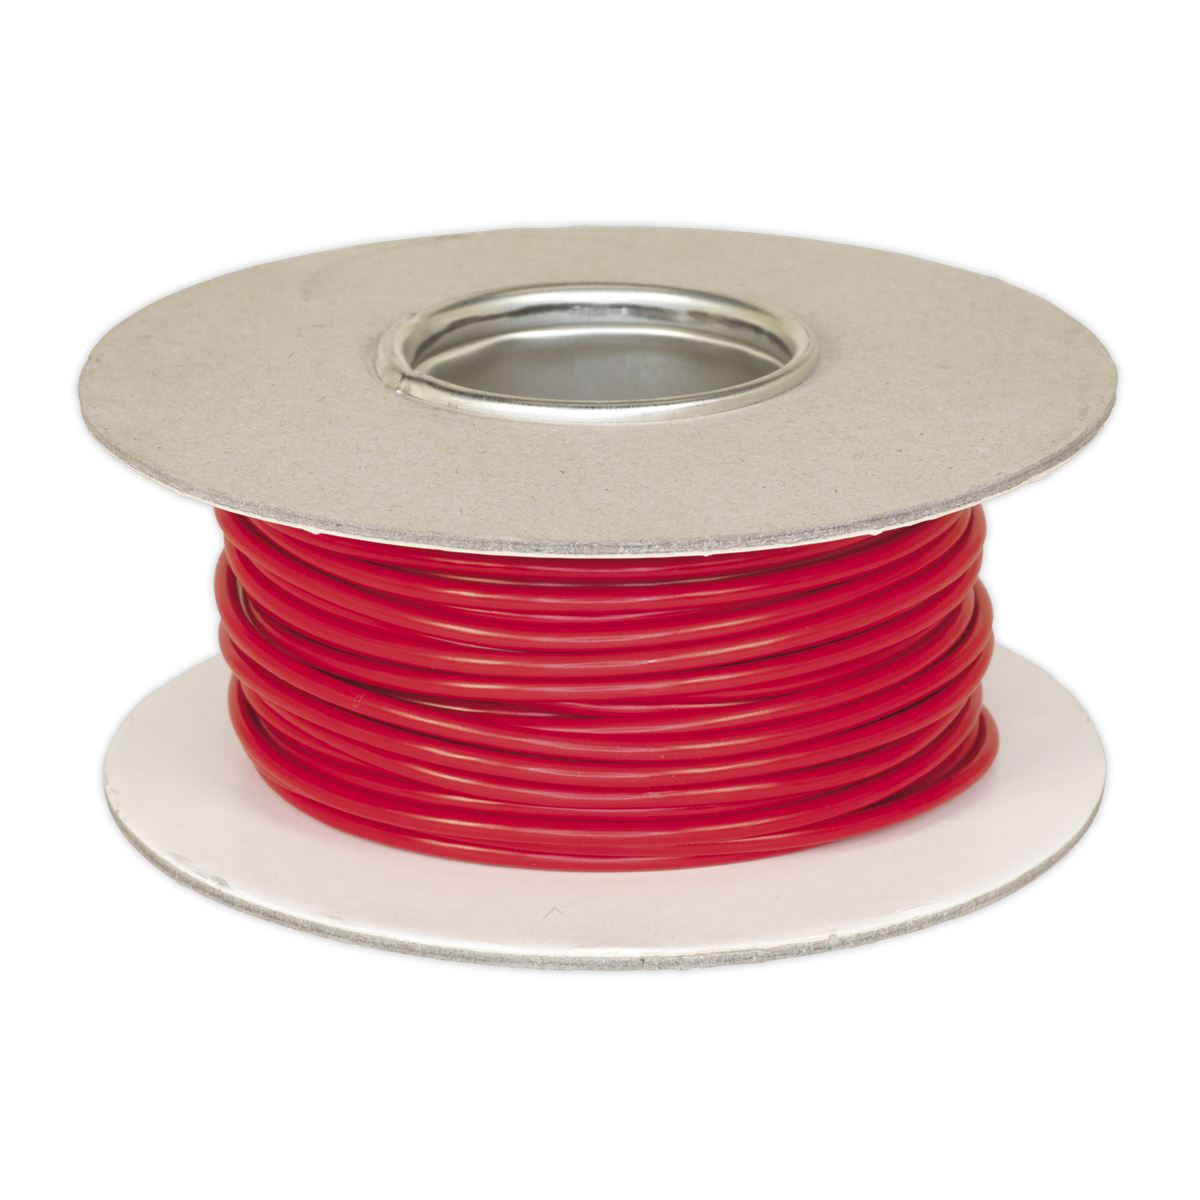 Sealey Automotive Cable Thin Wall Single 3mm² 44/0.30mm 30m Red